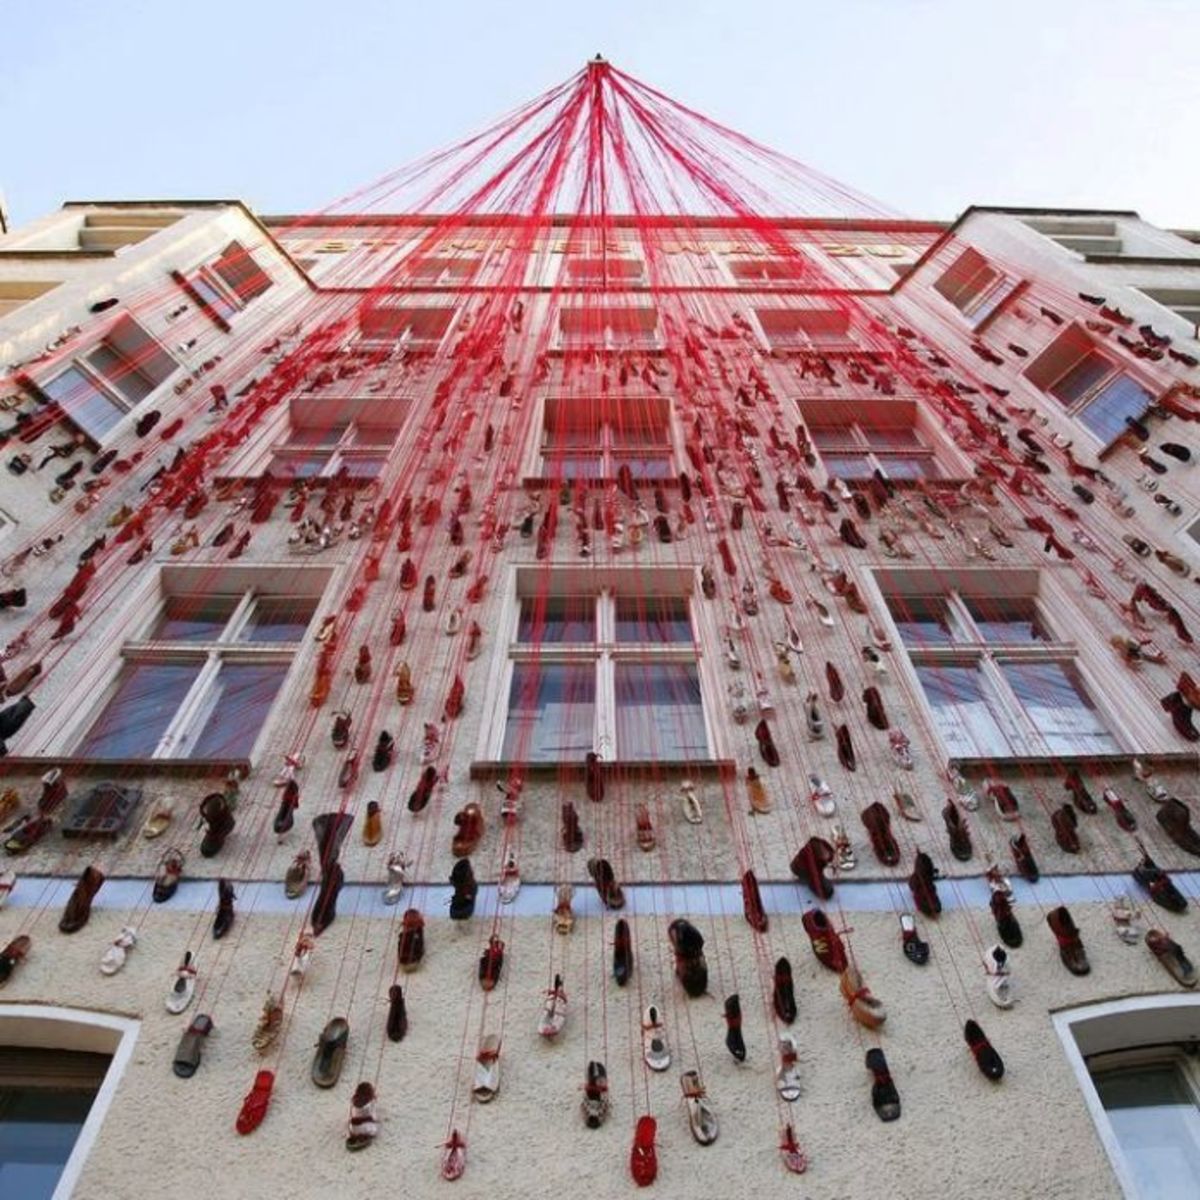 This gigantic Christmas decoration by Japanese installation artist, Chiharu Shiota, definitely resembles a large spider web.